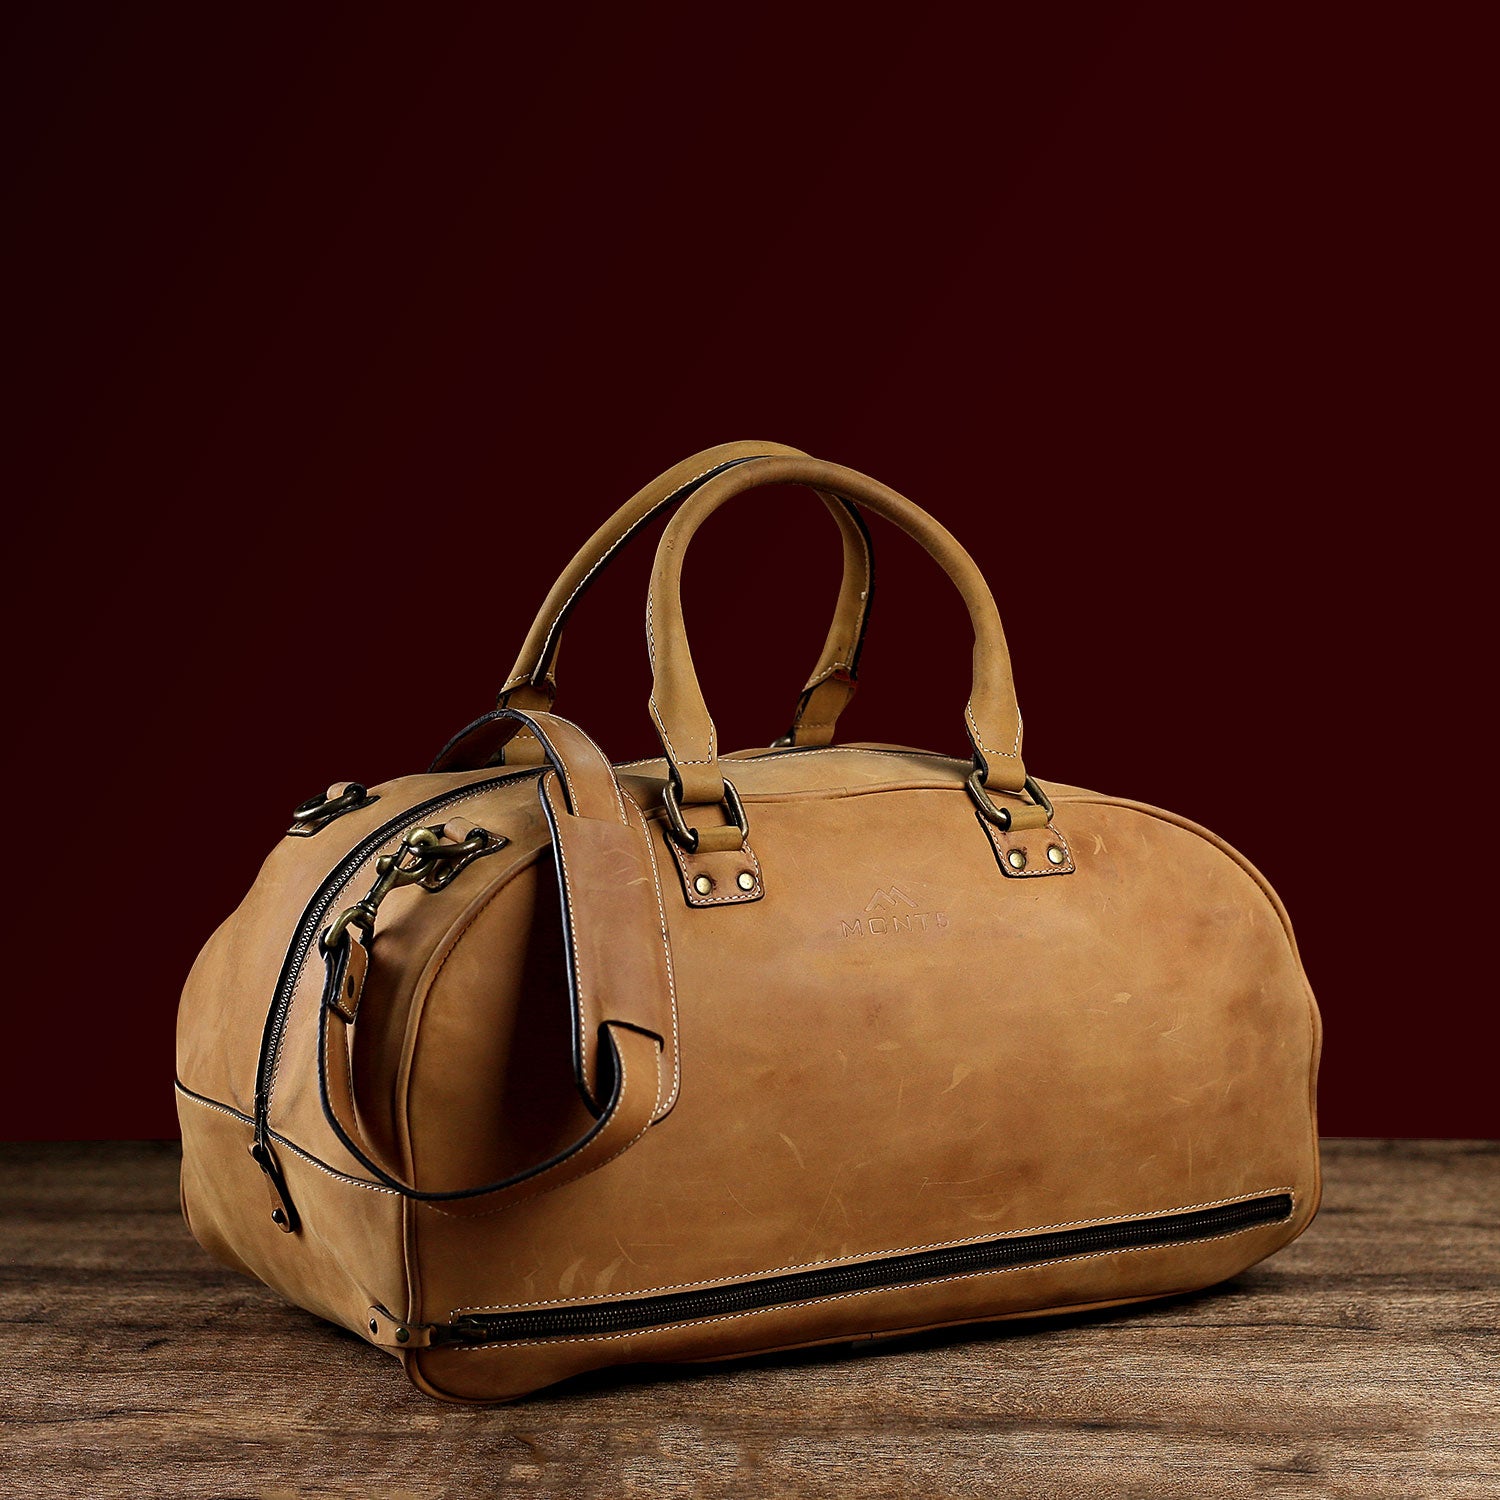 Small Duffle Bag, Carry On Leather Luggage